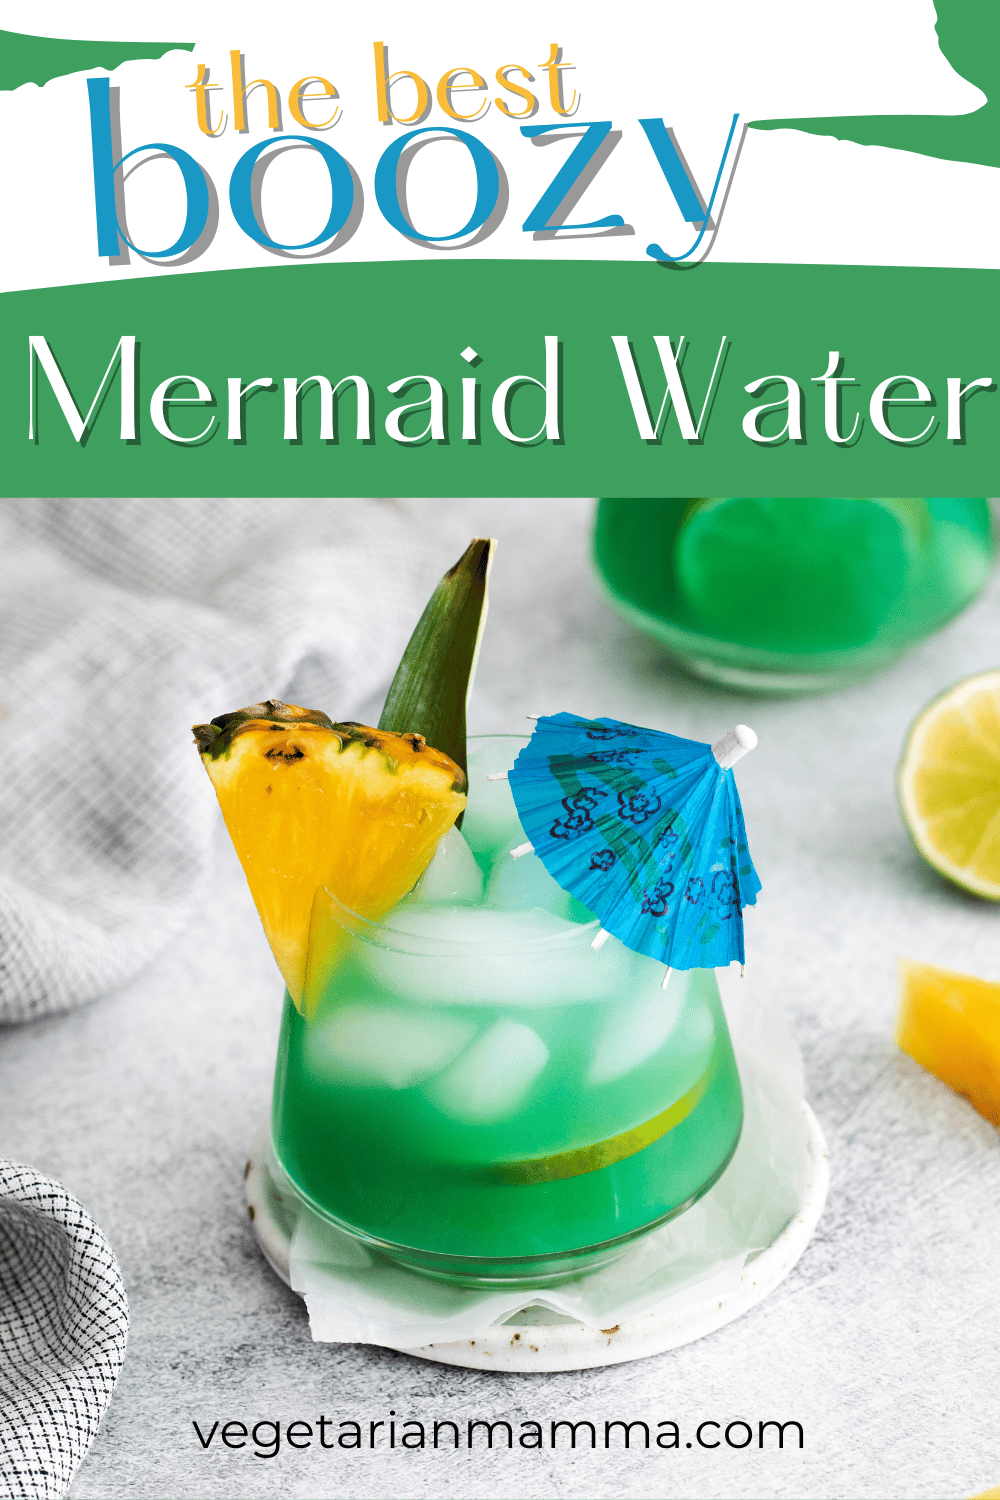 This Mermaid Water Drink is full of tropical flavor that will make you feel like you are sipping the cocktail on the beach! It is a brilliant, beautifully colored cocktail.